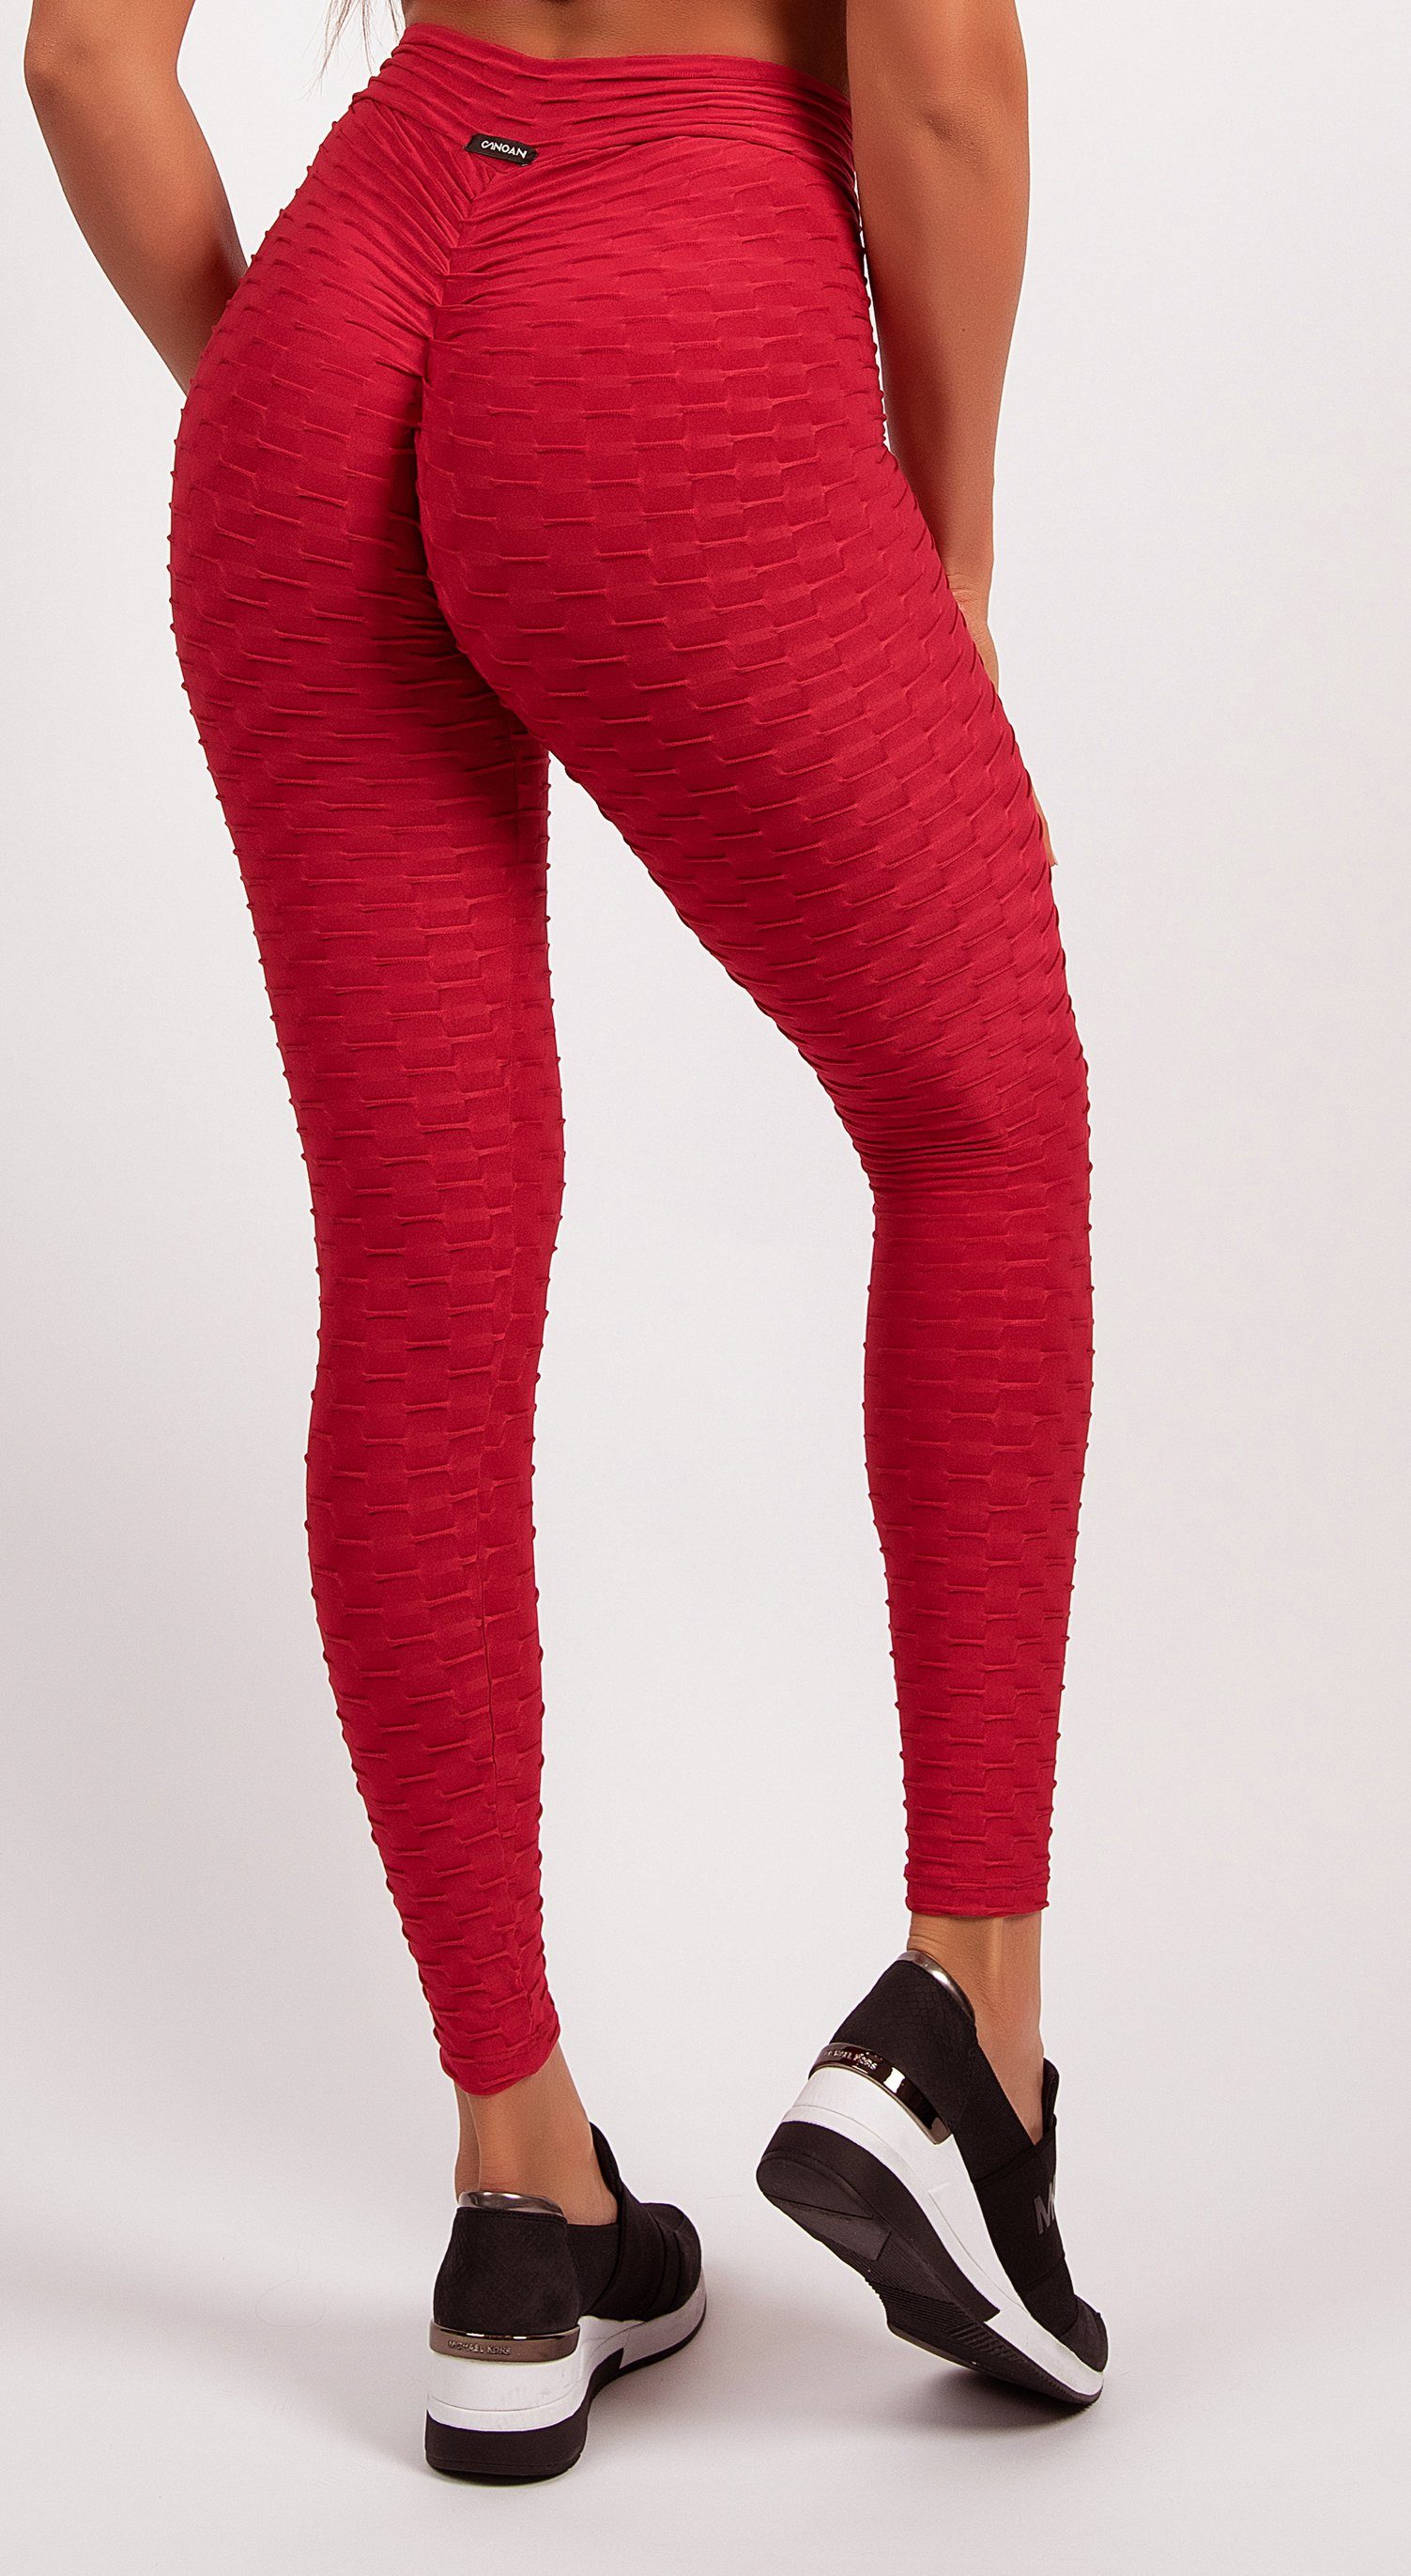 Brazilian Leggings  Anti Cellulite Honeycomb Textured Scrunch Booty Red